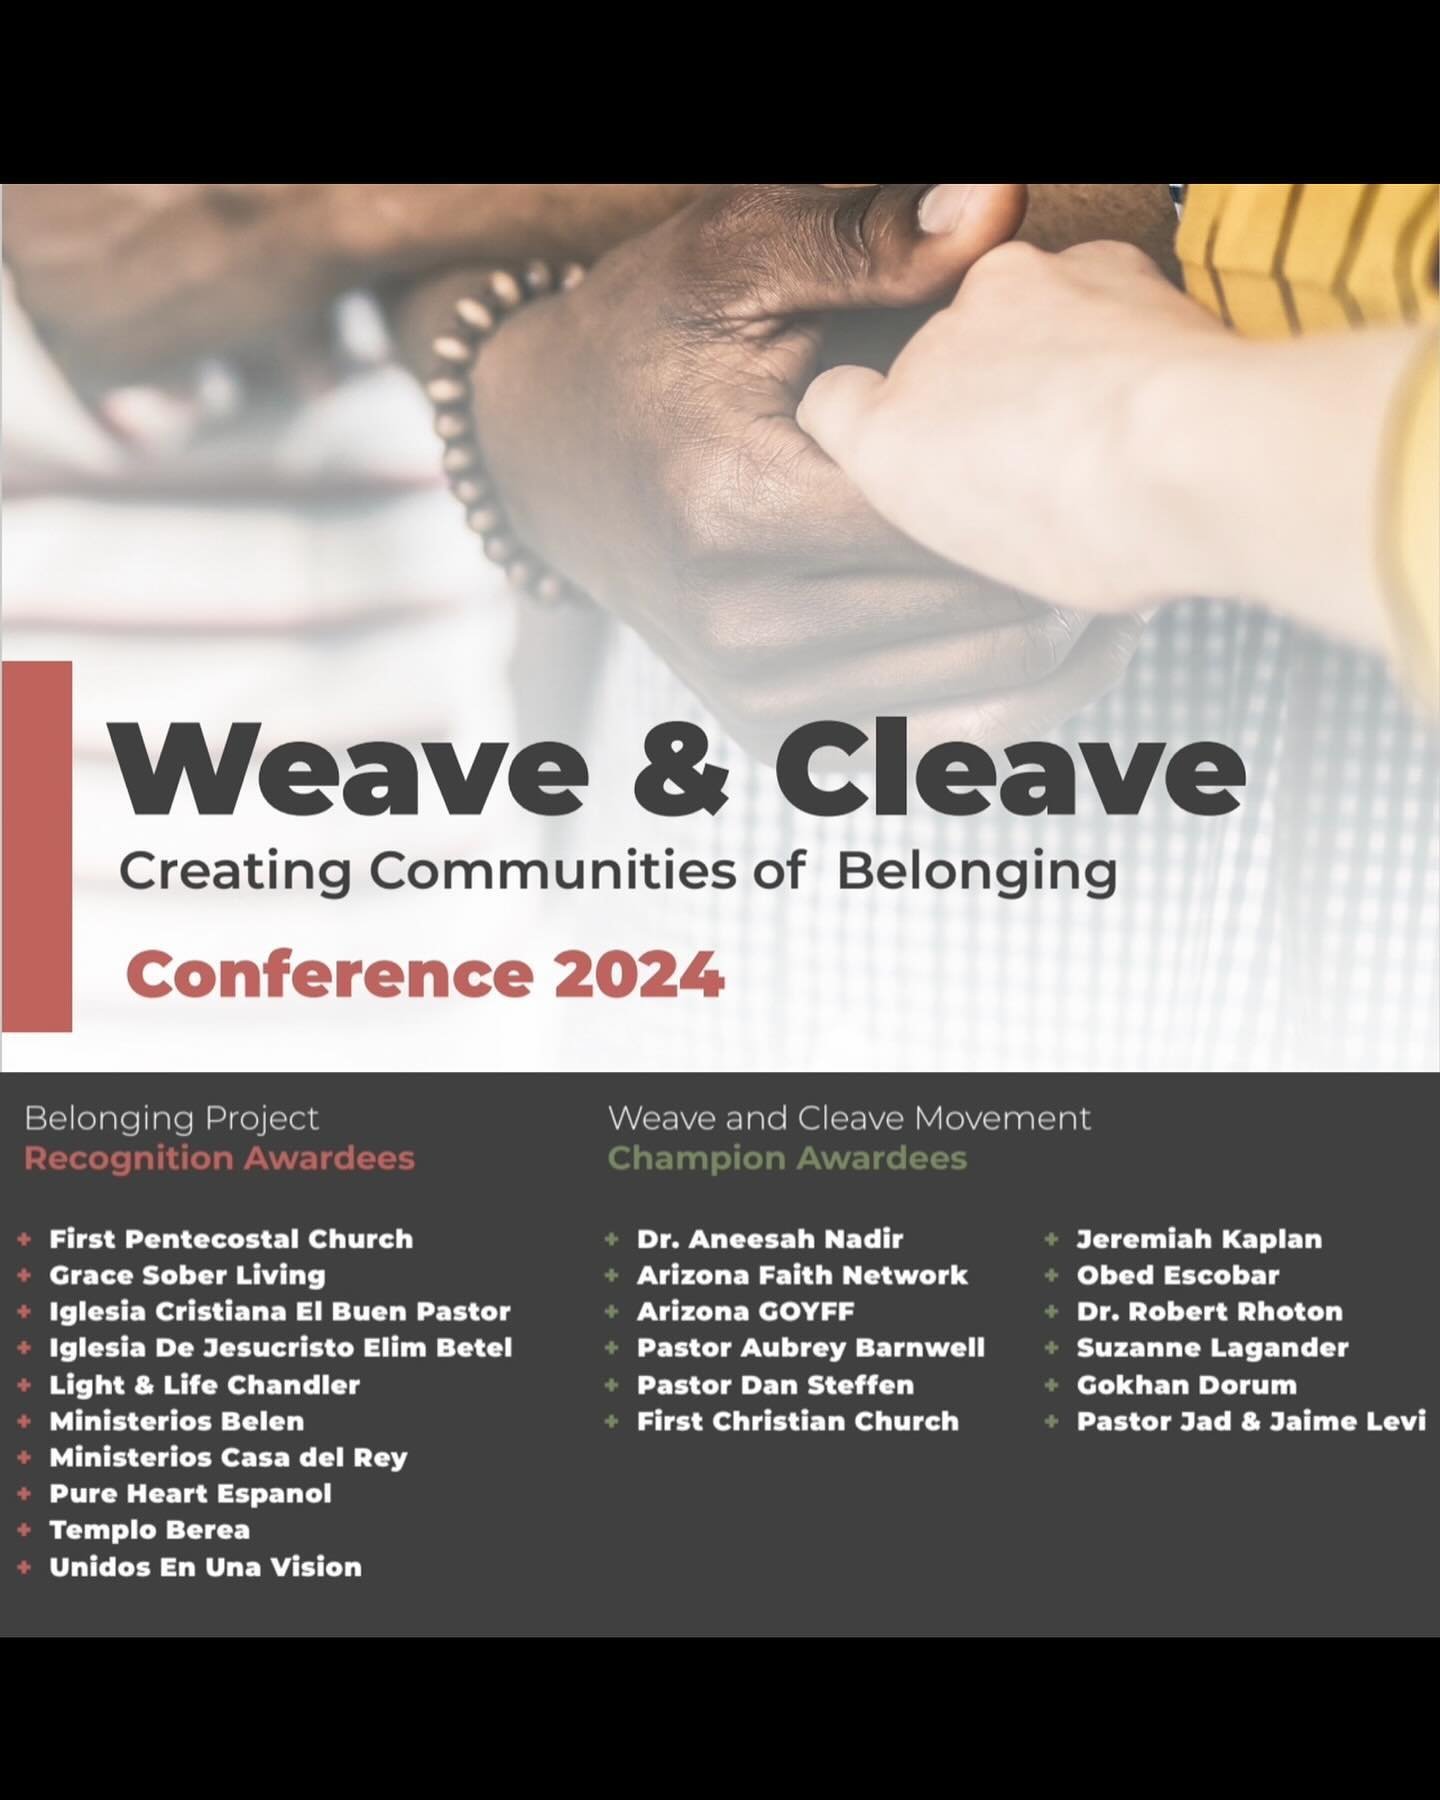 Two more days then&hellip; 
The 2nd Annual Weave and Cleave Conference! 

Registration: 
https://2ndweaveandcleave.eventbrite.com